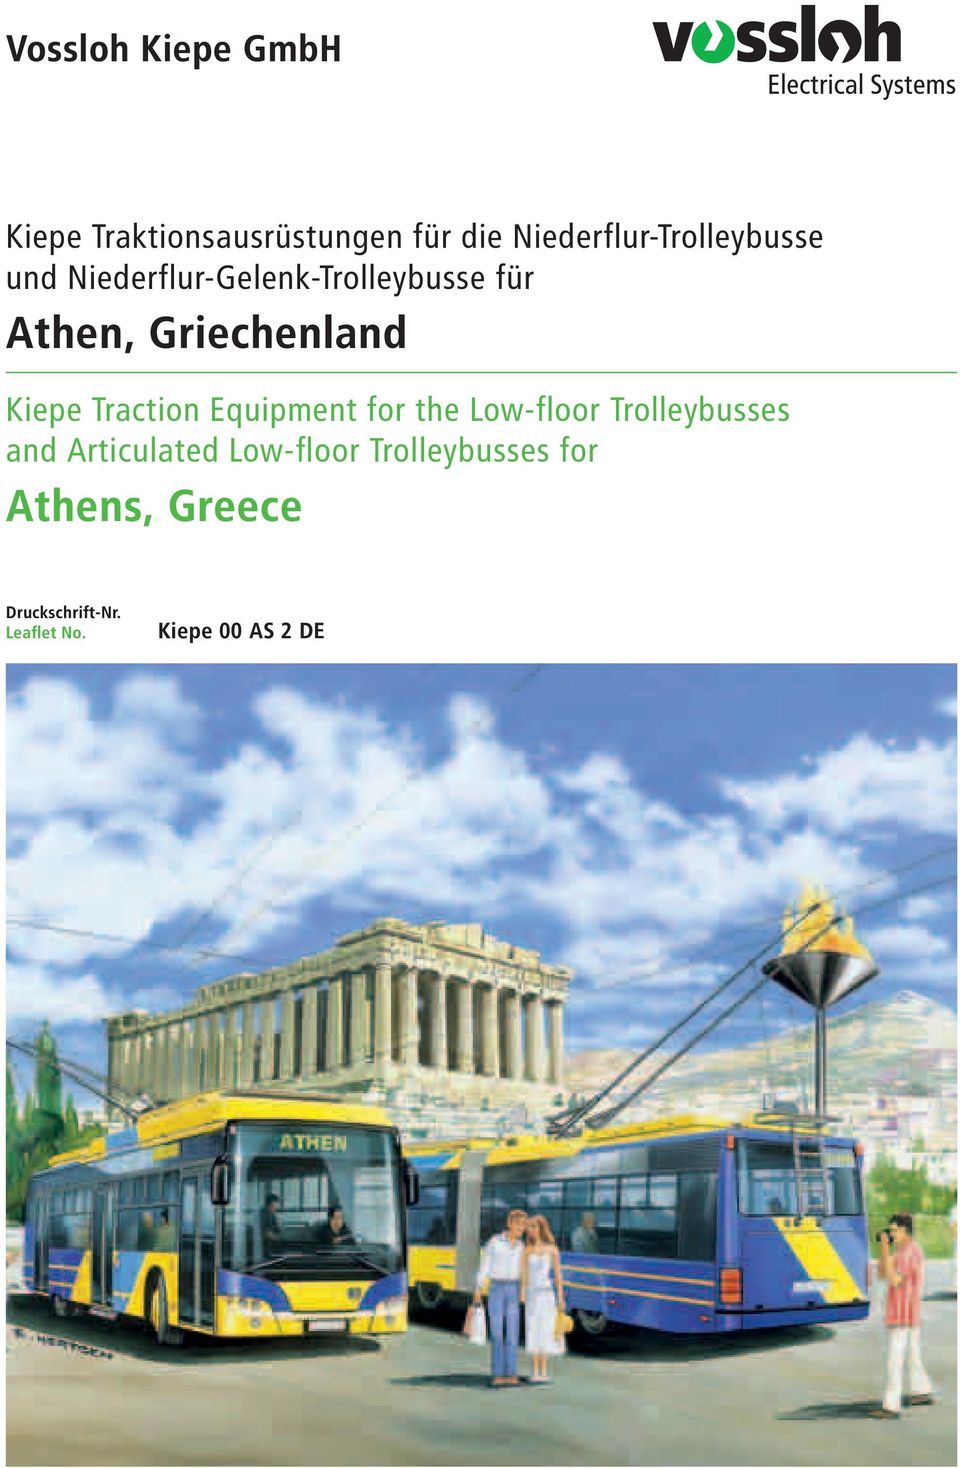 Griechenland Kiepe Traction Equipment for the Low-floor Trolleybusses and